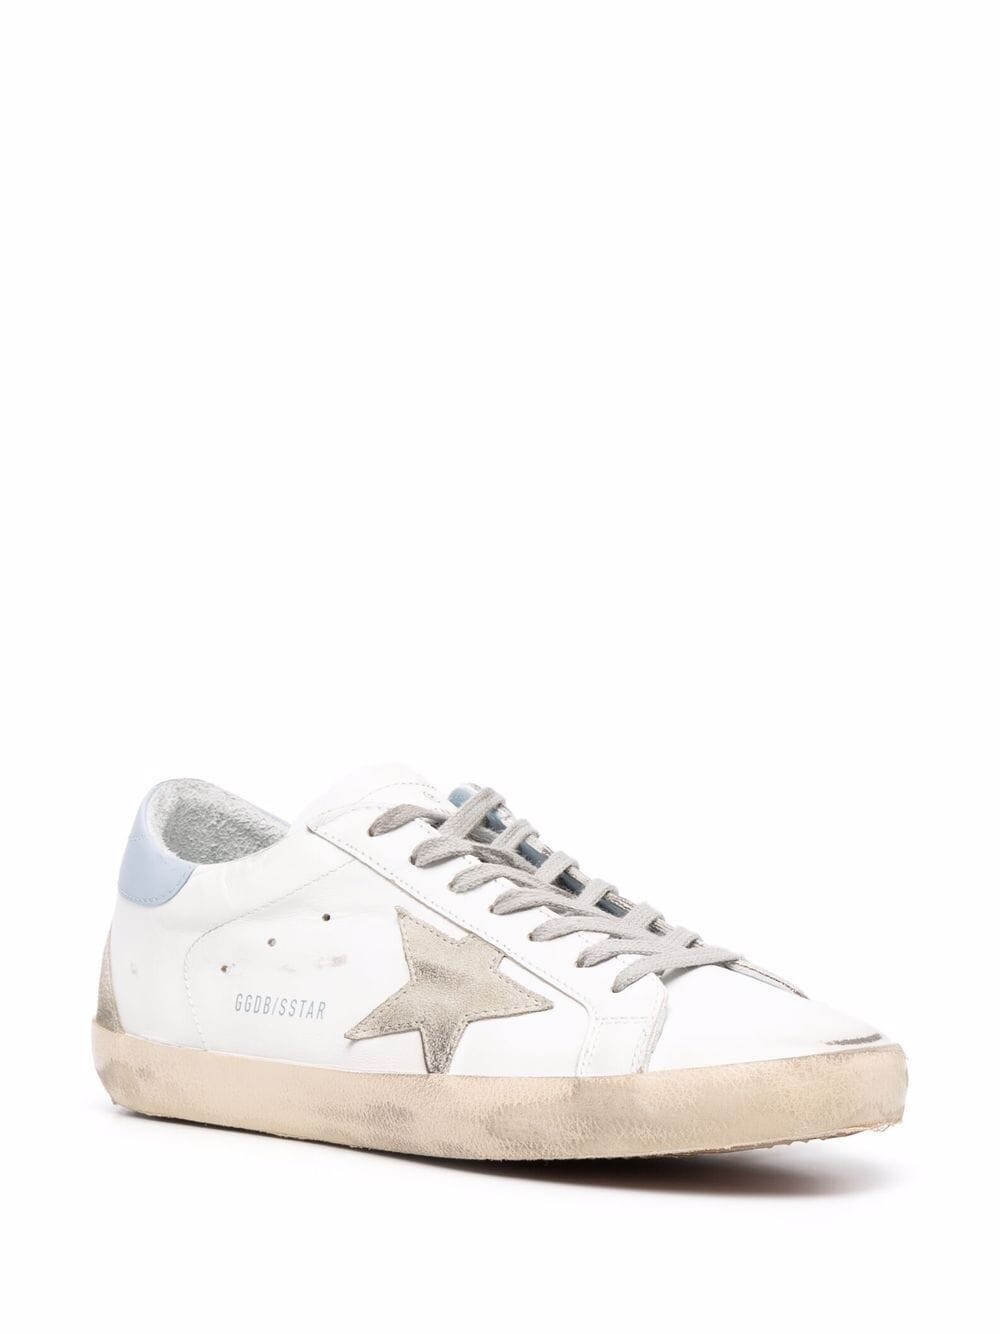 GOLDEN GOOSE DELUXE BRAND GMF00102/F00256910588 /WHITE/ICE/BLUE